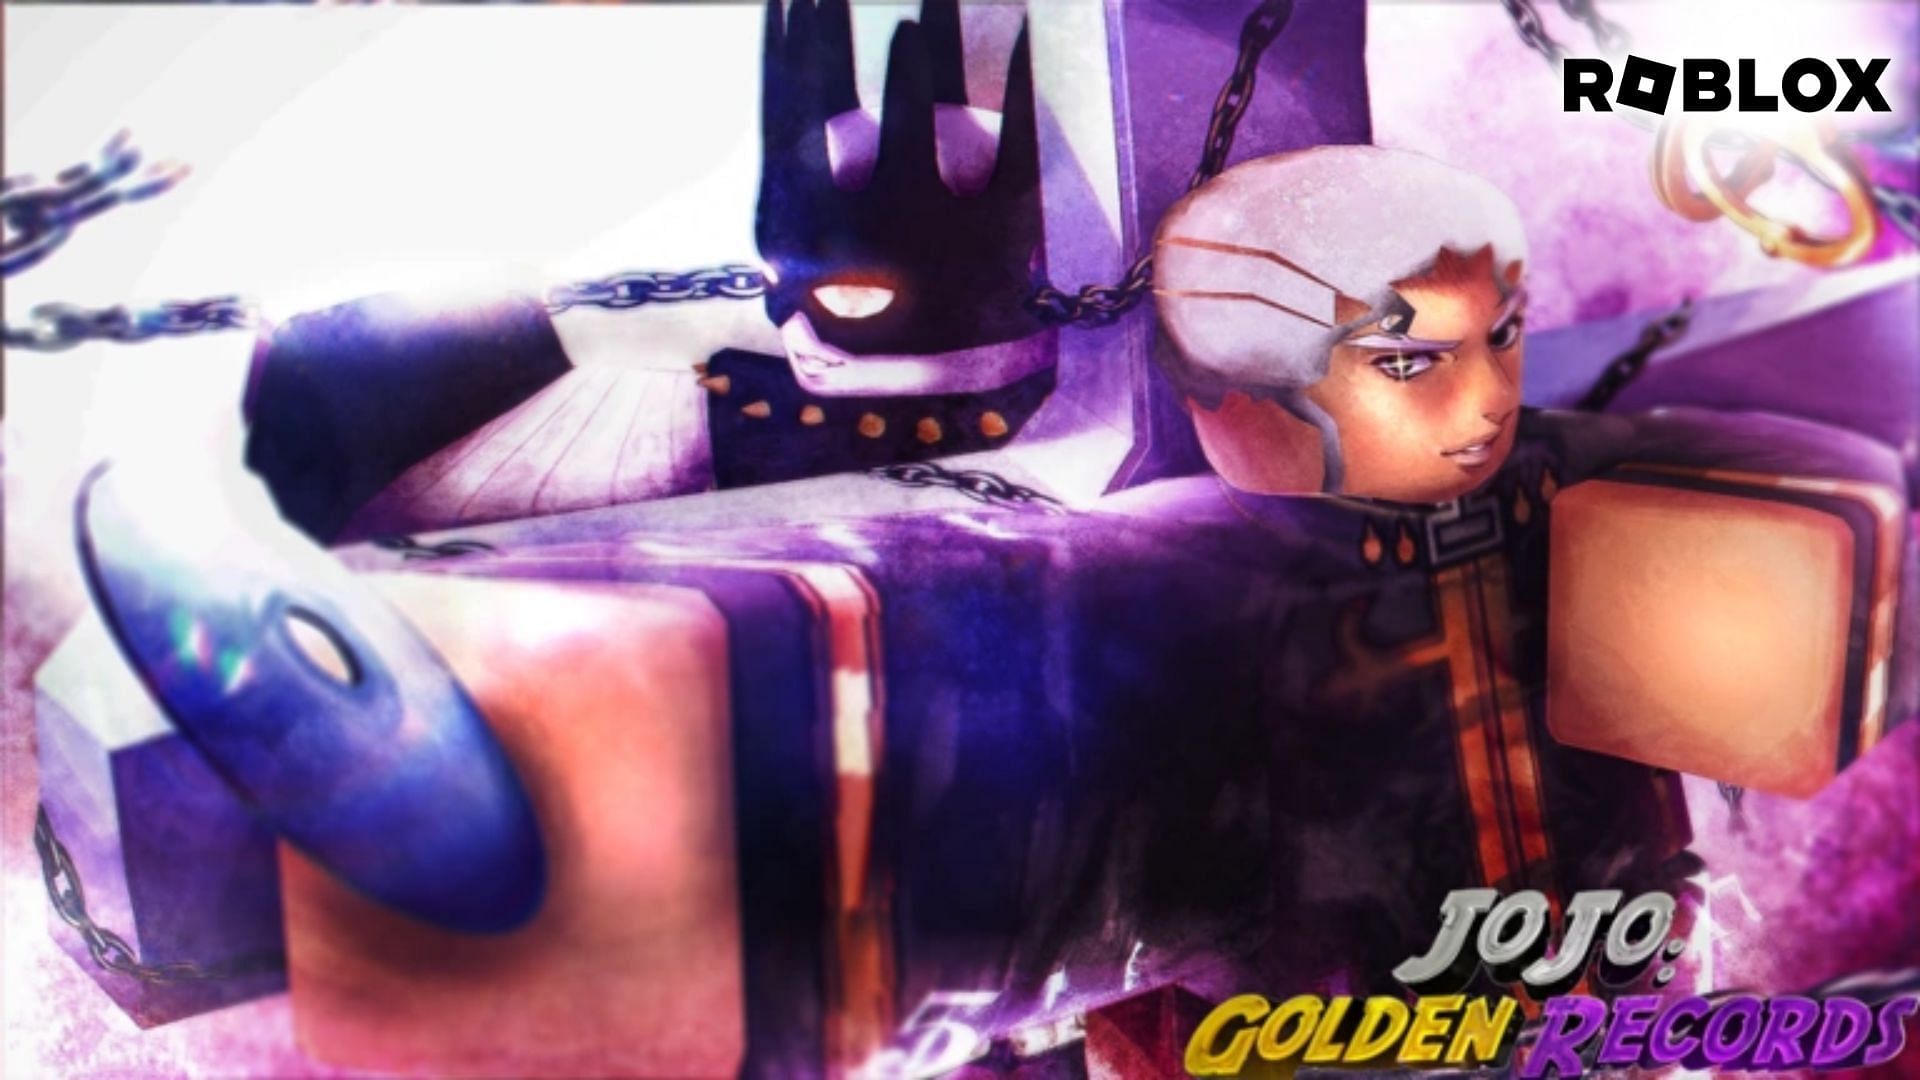 These are the best stands in JoJo Golden Records (Image via Roblox)